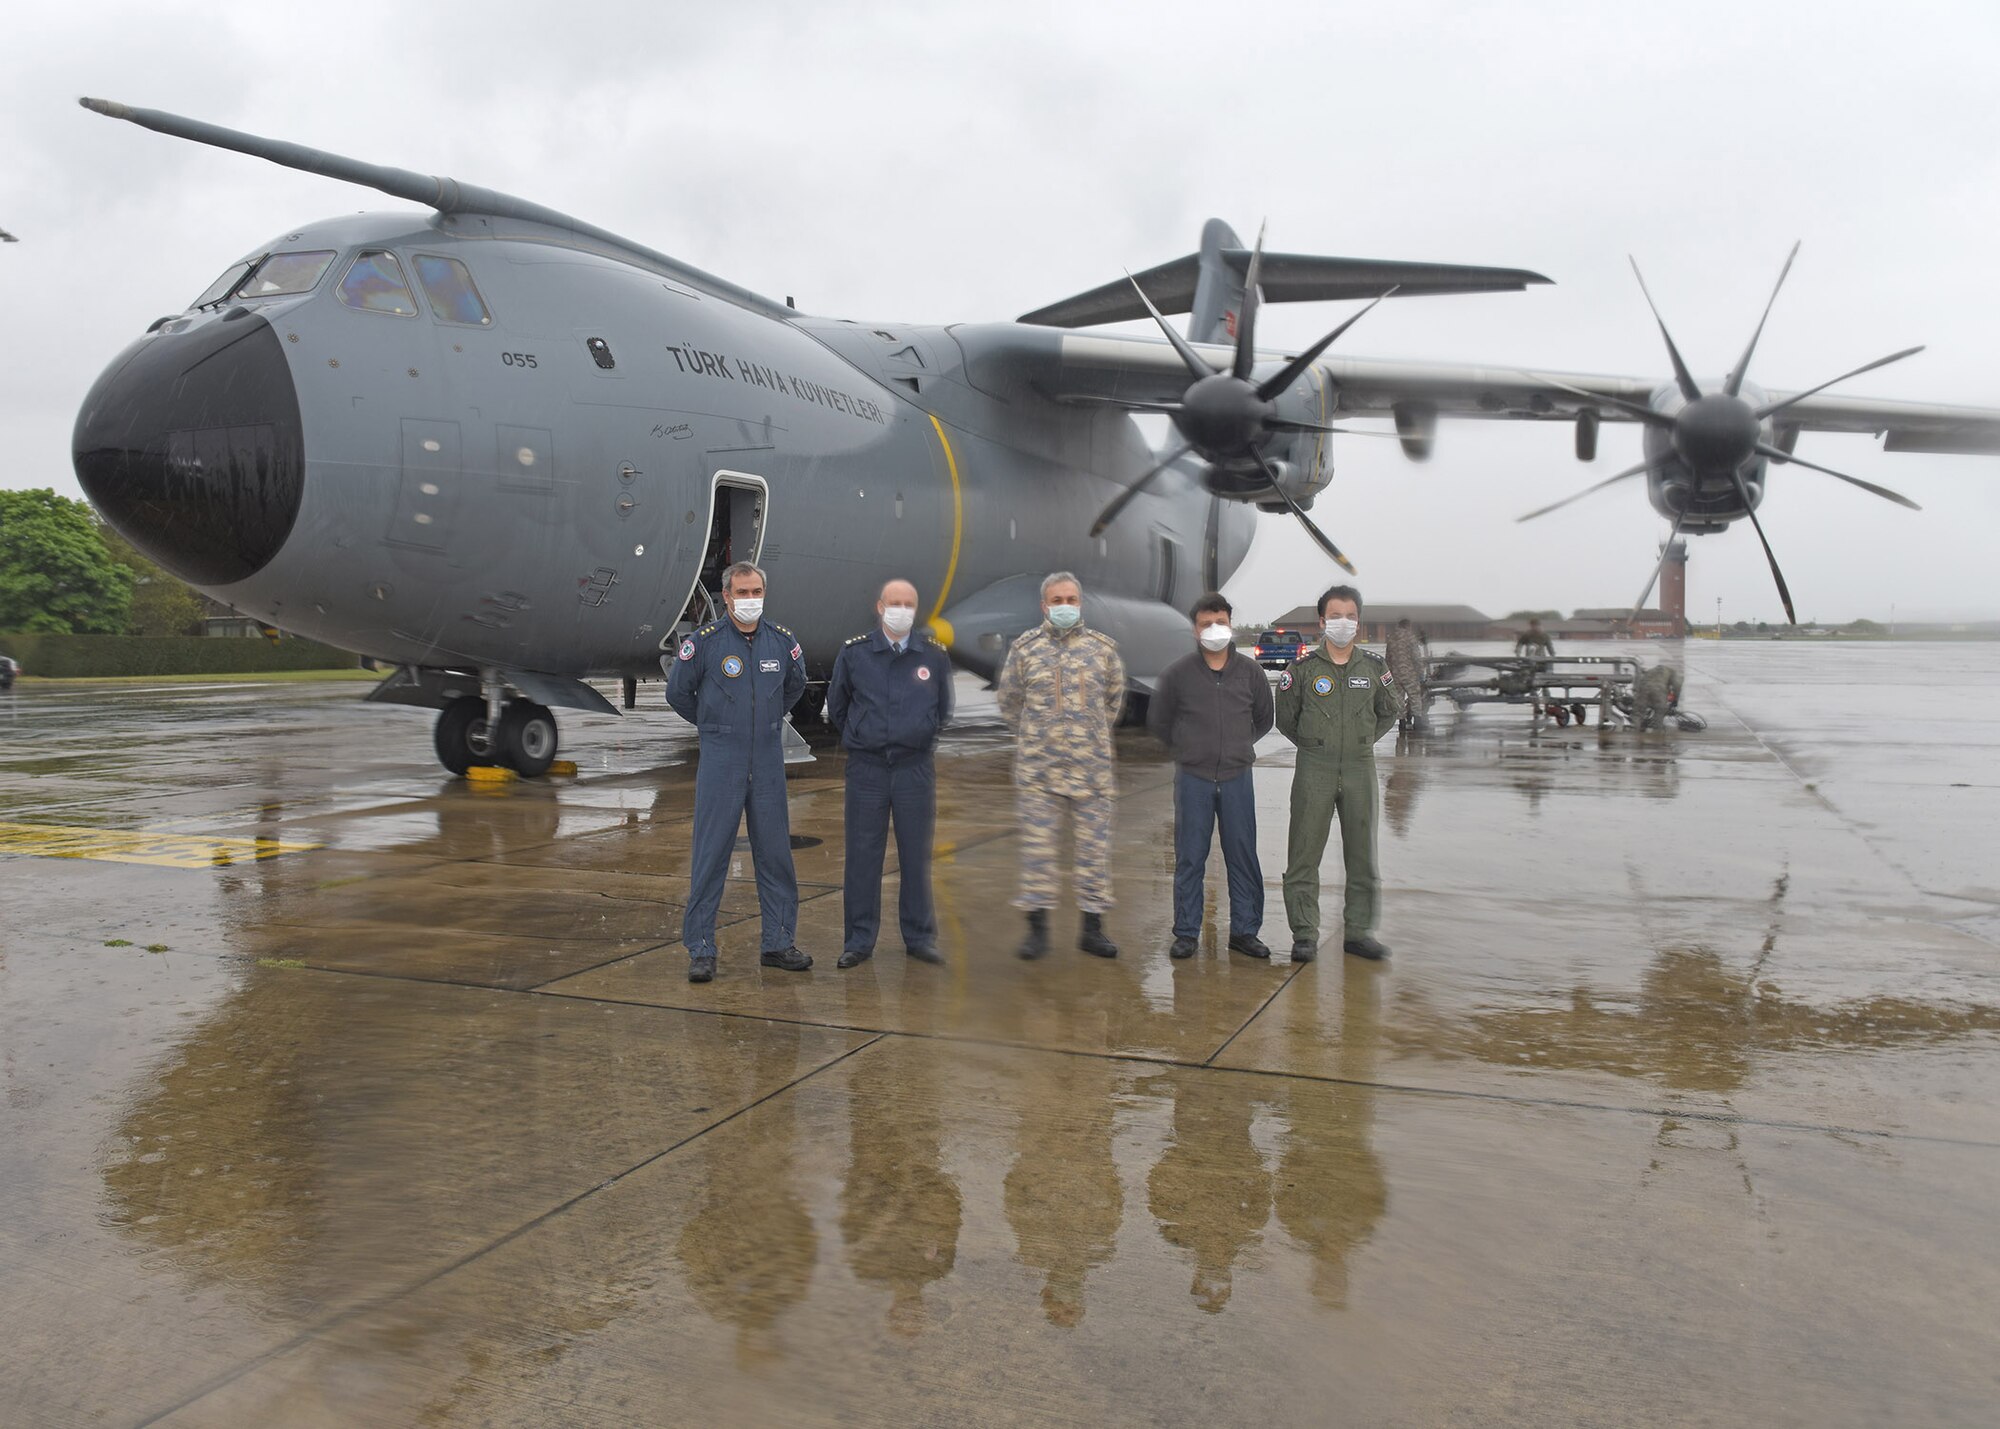 Group Capt. Tamer Tufekci, center, Turkish Air Attaché from the Turkish Embassy in London, poses for a photo with members of the Turkish air force during a refueling stop at RAF Mildenhall, England, April 28, 2020. The crew were on their way to Joint Base Andrews, Md., to deliver COVID-19 medical supplies including gloves, goggles, masks and hand sanitizer. (U.S. Air Force photo by Karen Abeyasekere)